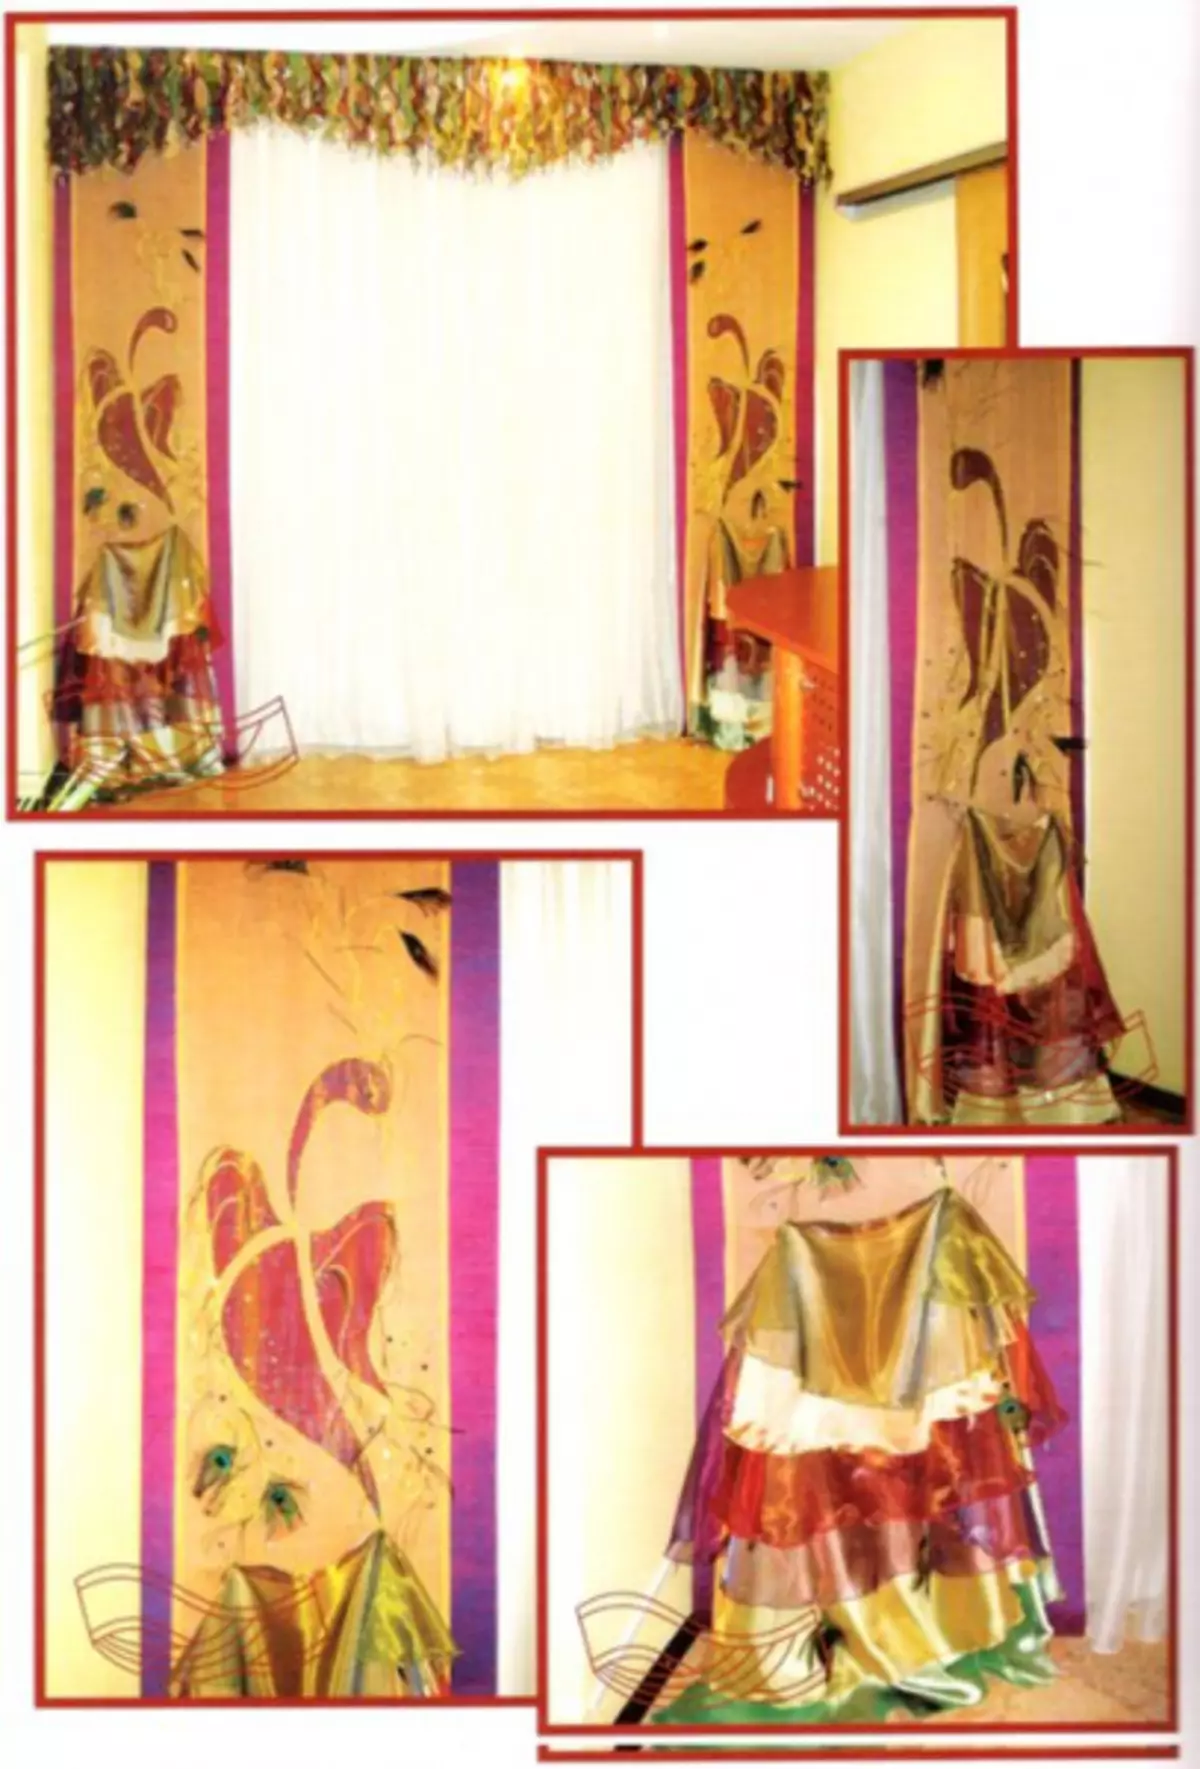 How to choose a program for a curtain design